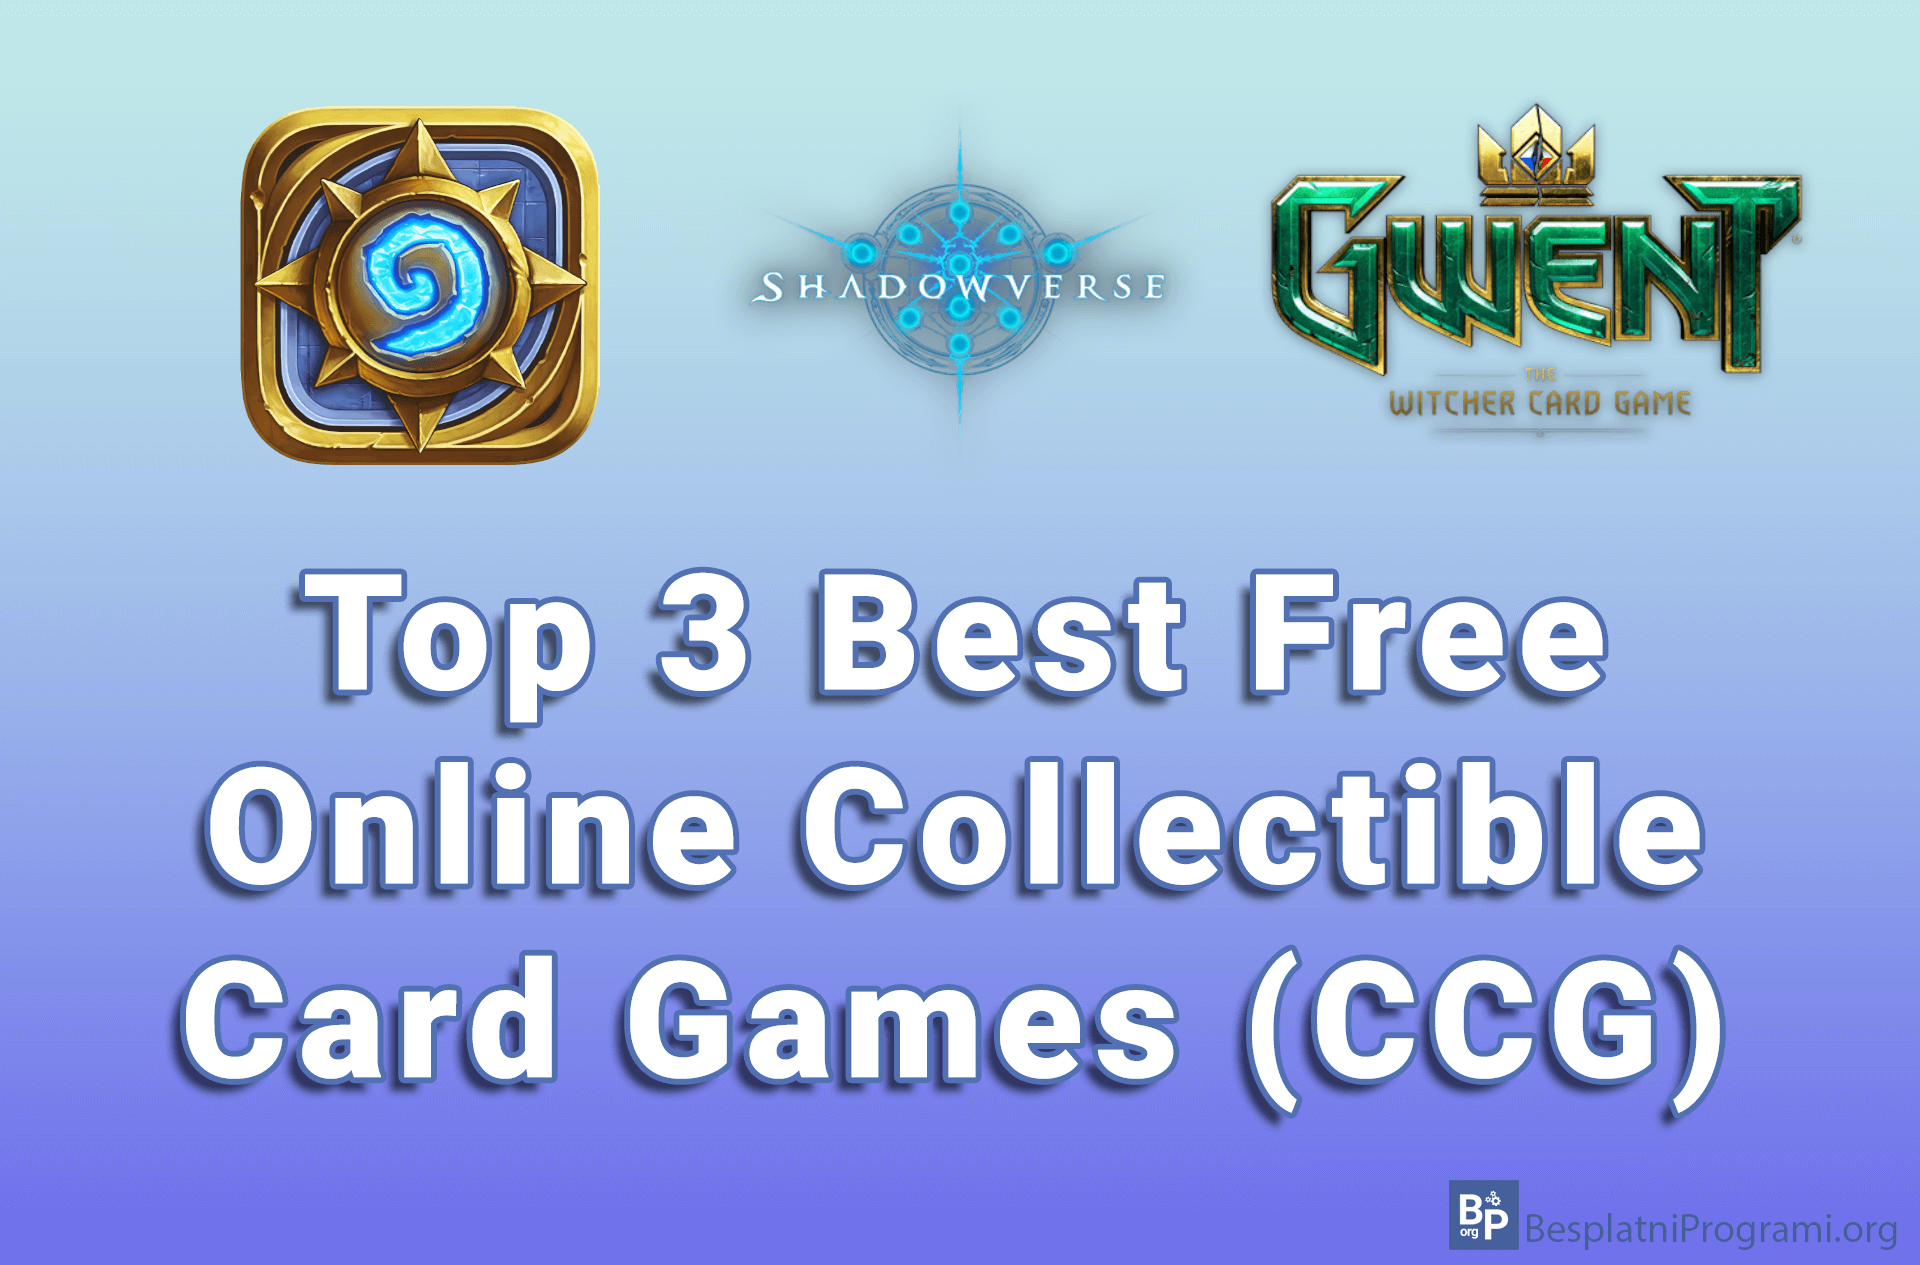 Top 3 Best Free Online Collectible Card Games (CCG)